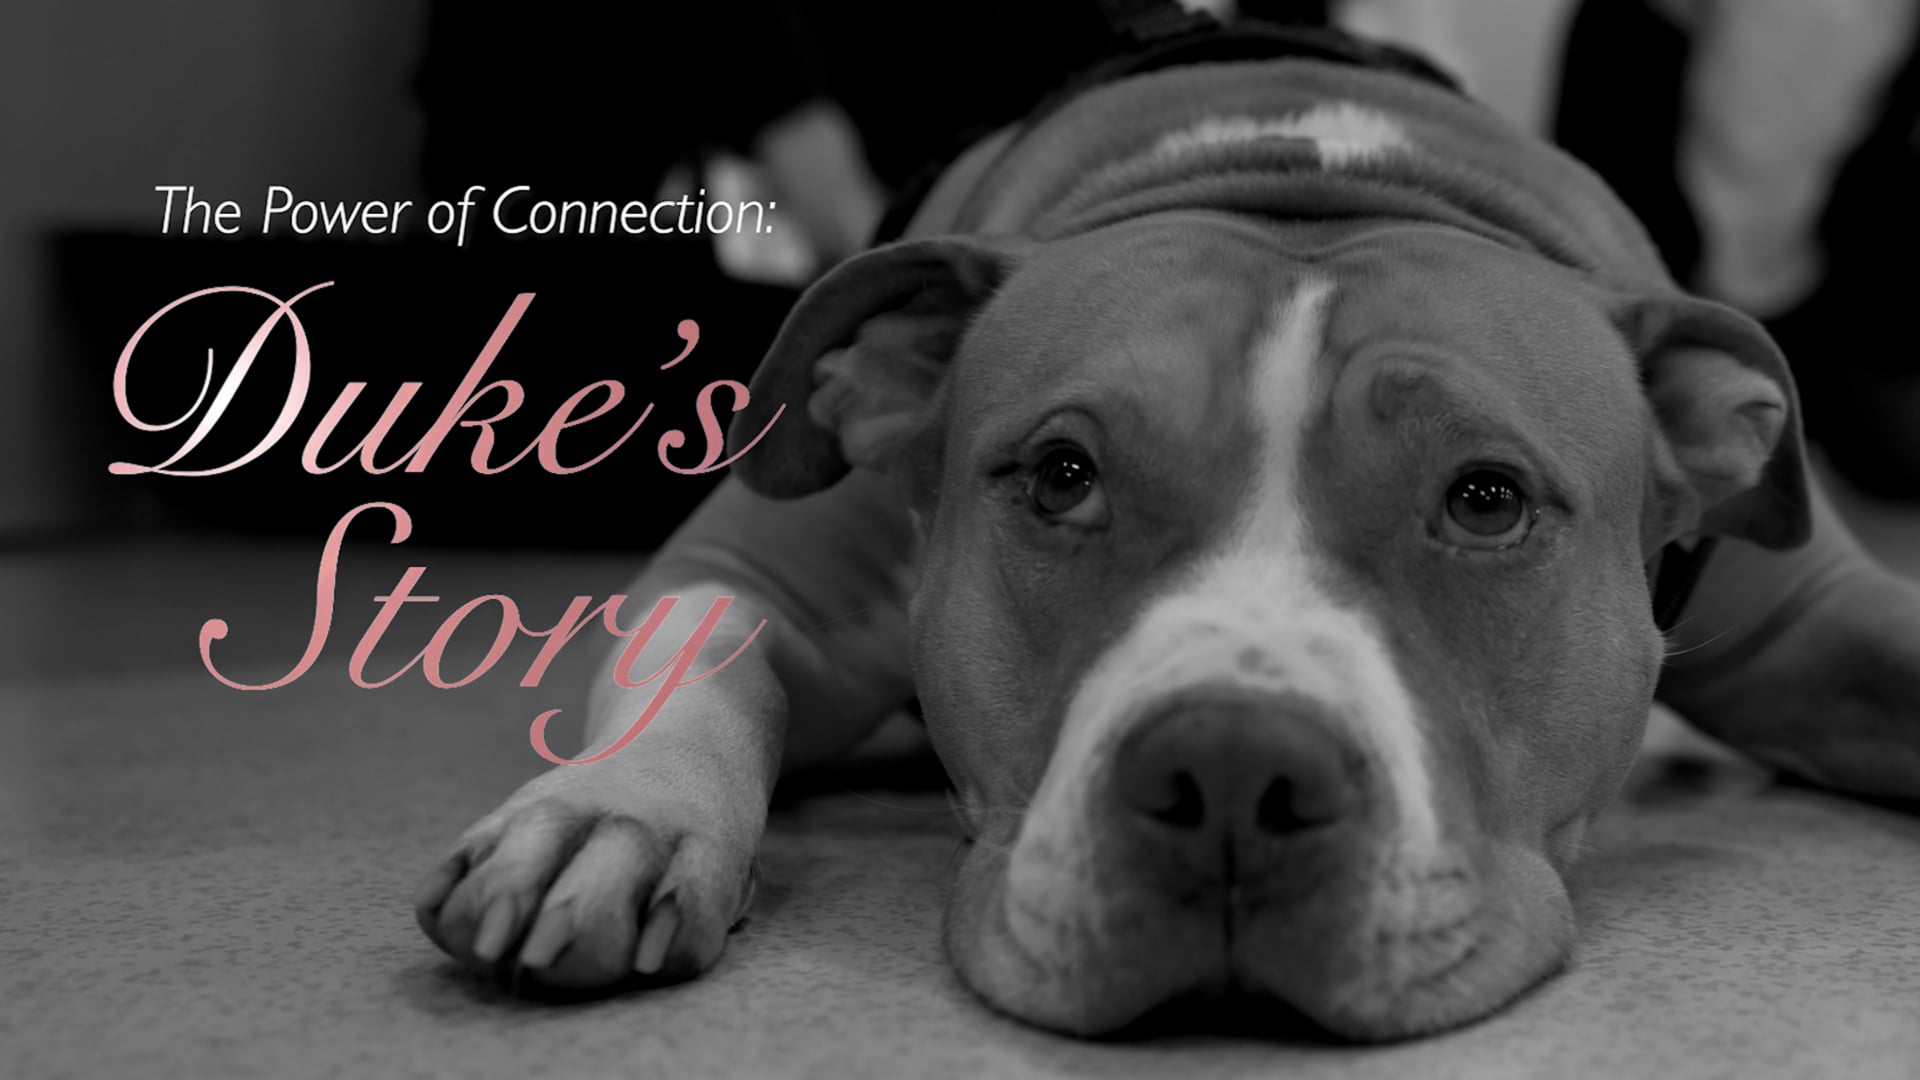 The Power of Connection: Duke's Story